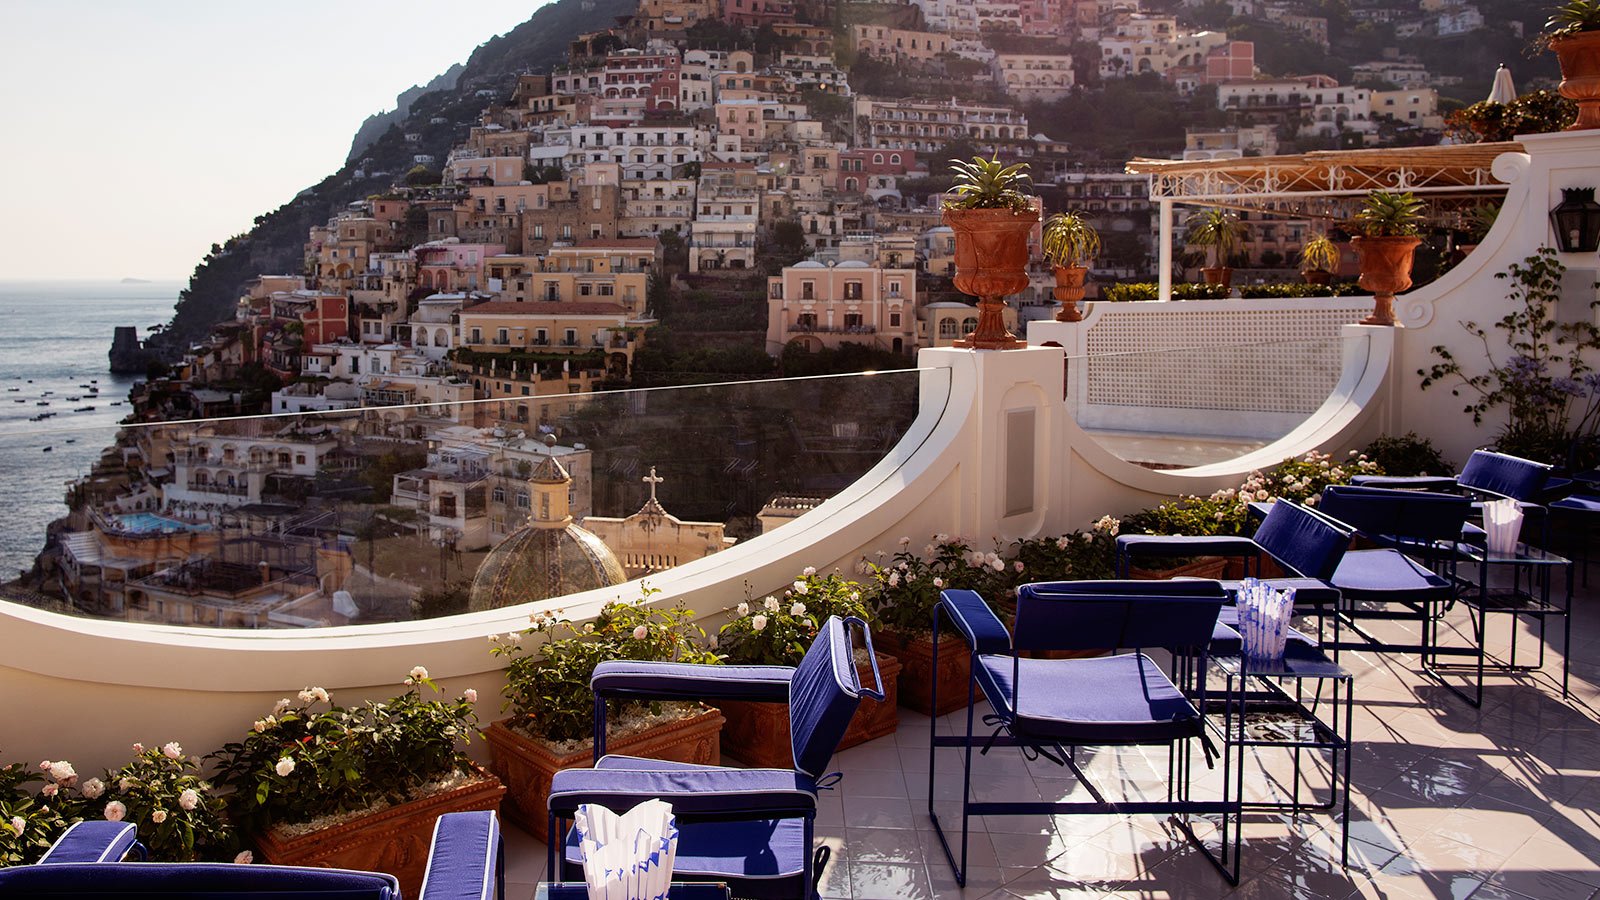 A sunset aperitivo is one of the best things to do in Positano